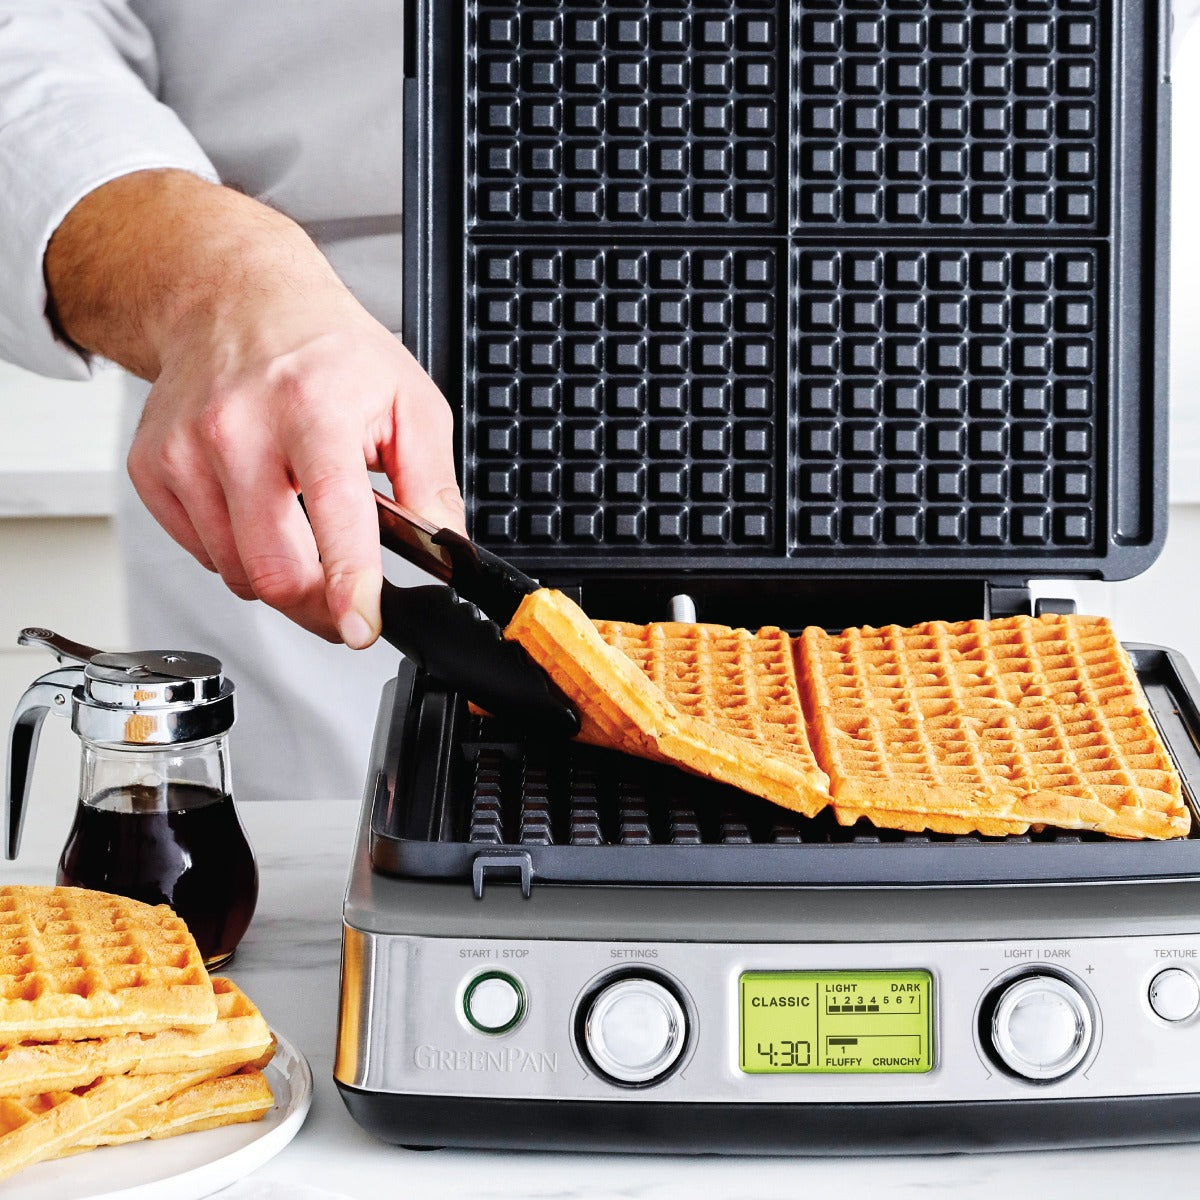  Mini Waffle Maker with 7 Removable Plates - Includes